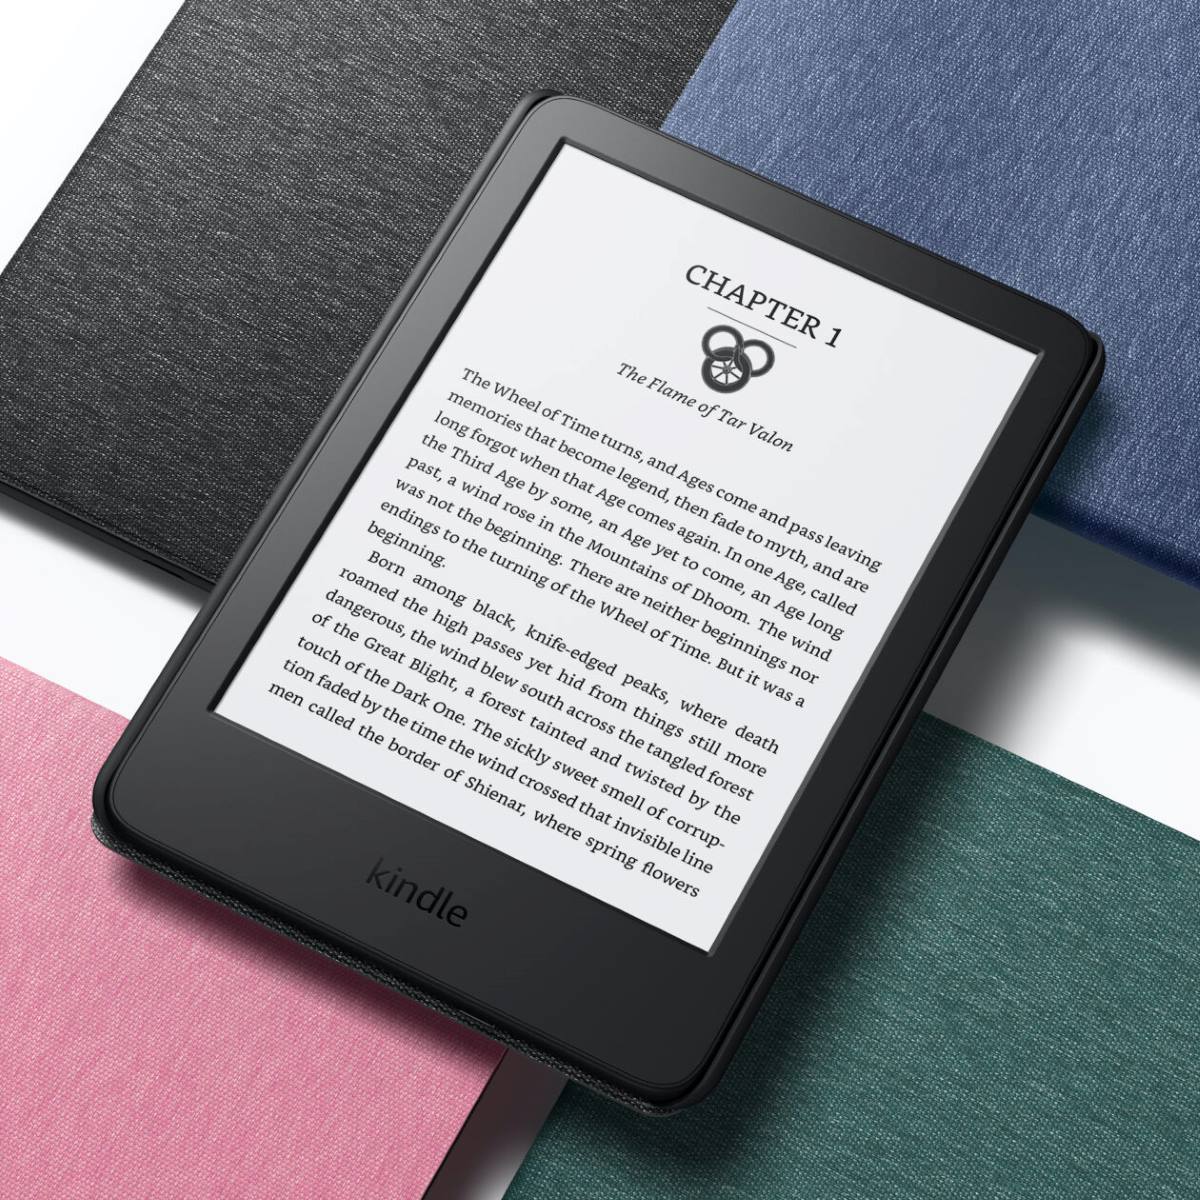 How To Copy And Paste From Kindle Cloud Reader